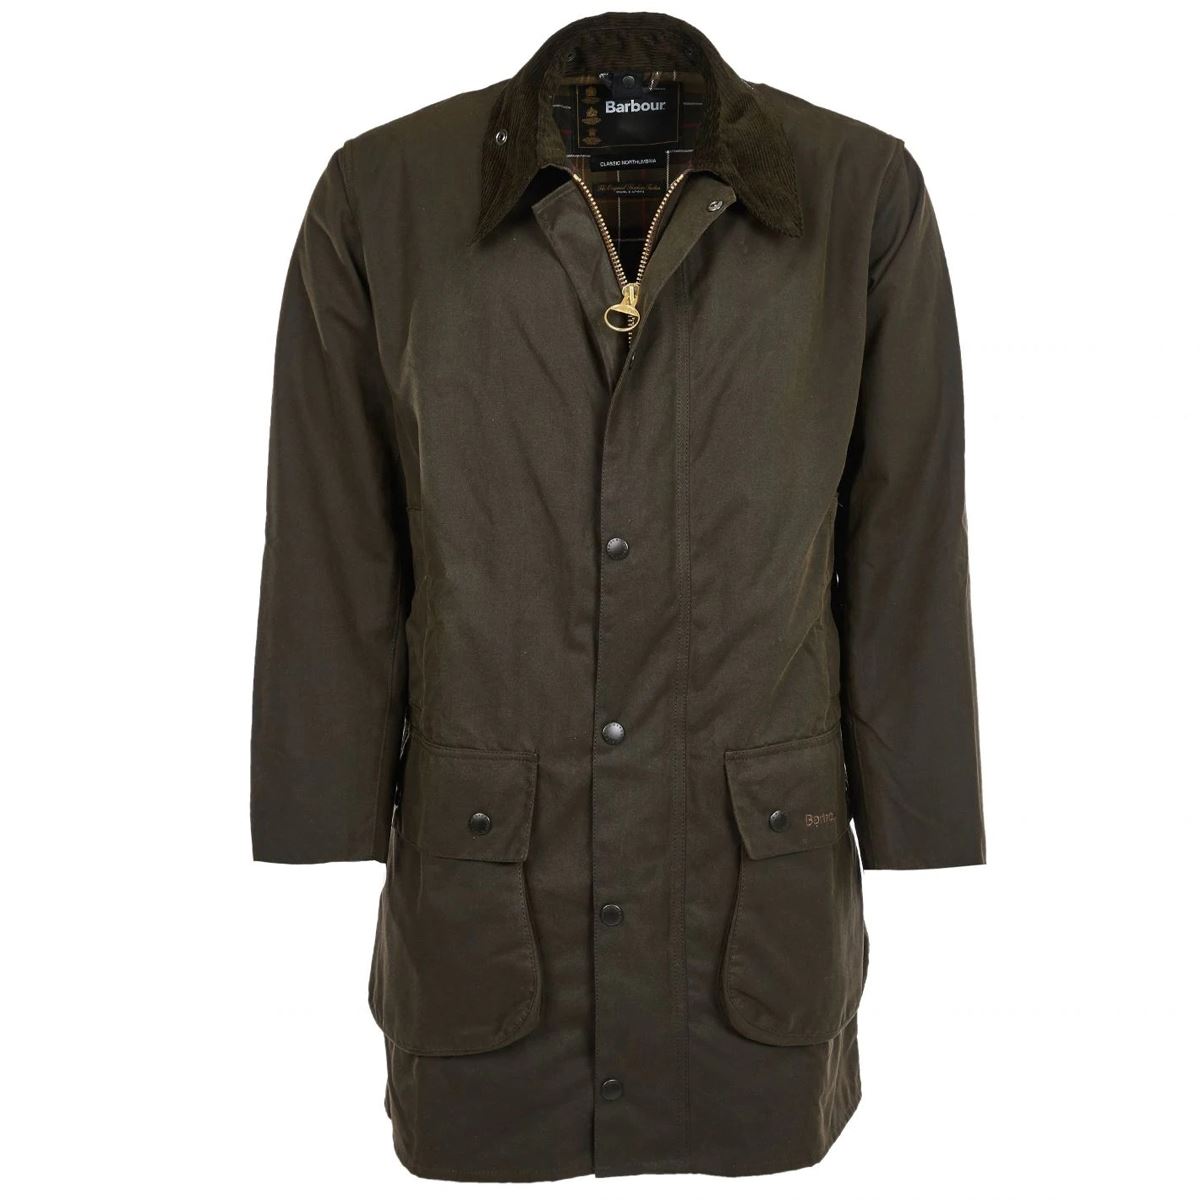 What are the features of the Barbour Northumbria Wax Jacket?